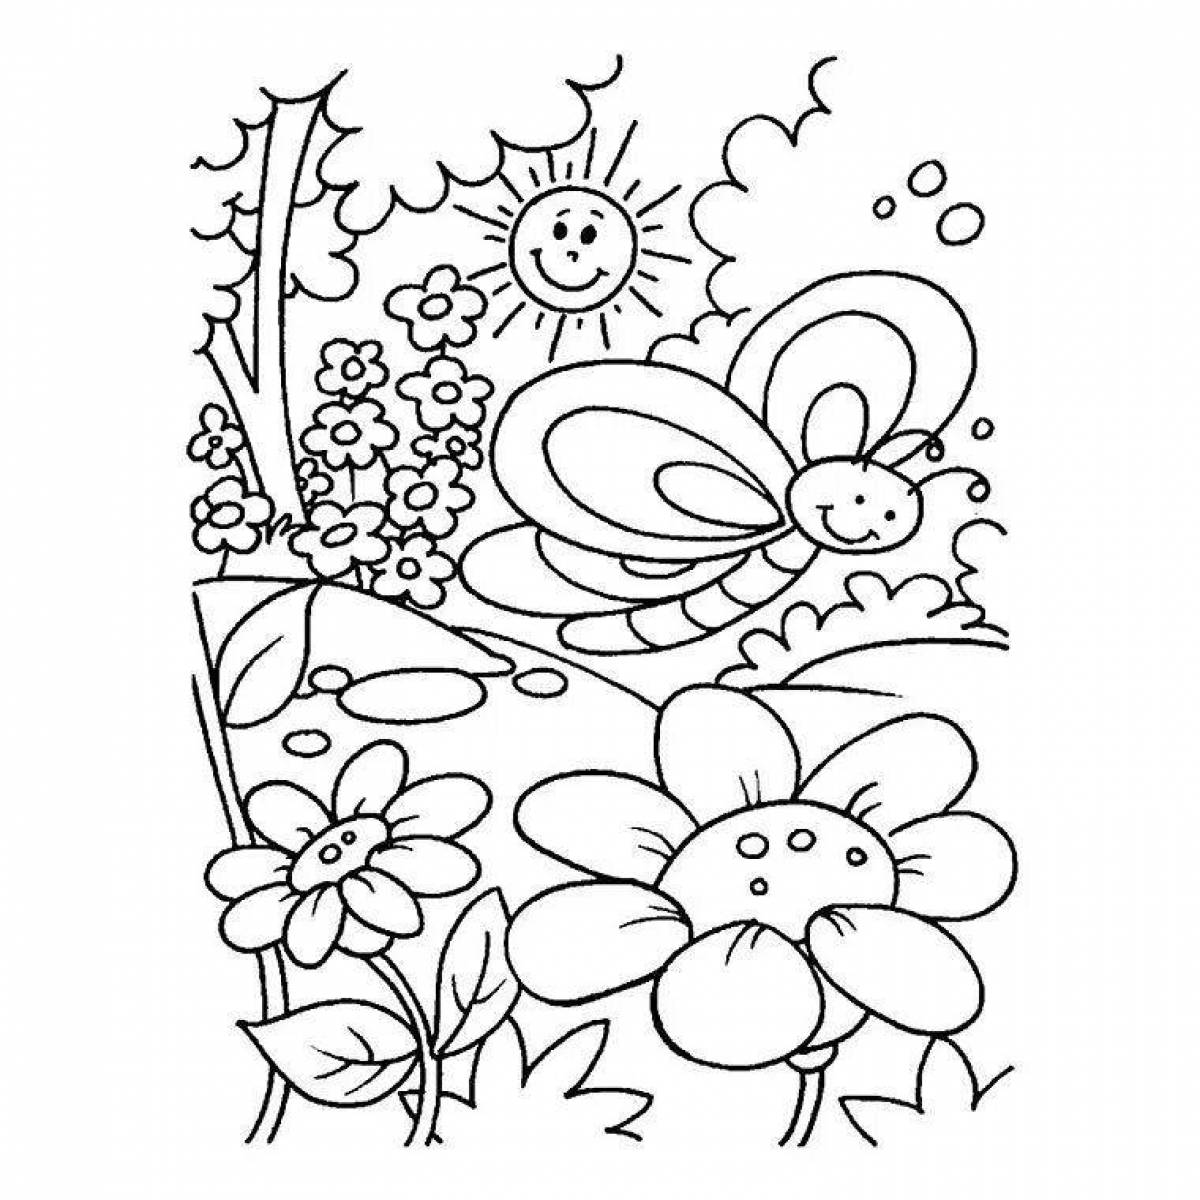 Coloring page lush meadow